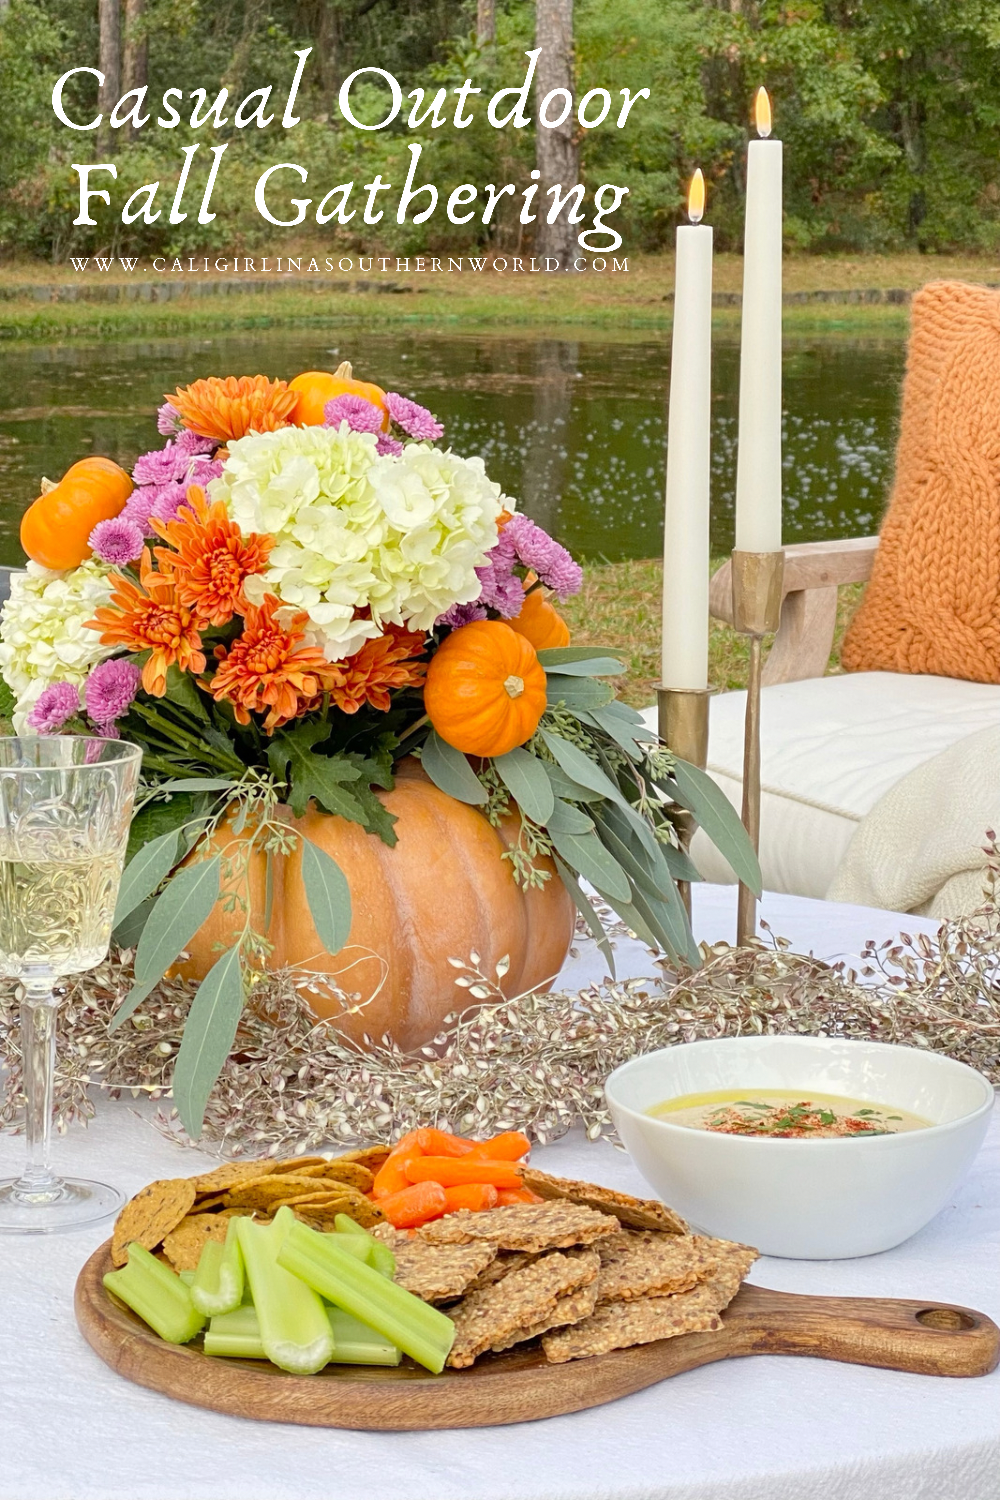 Pinterest Pin for a casual outdoor fall gathering.